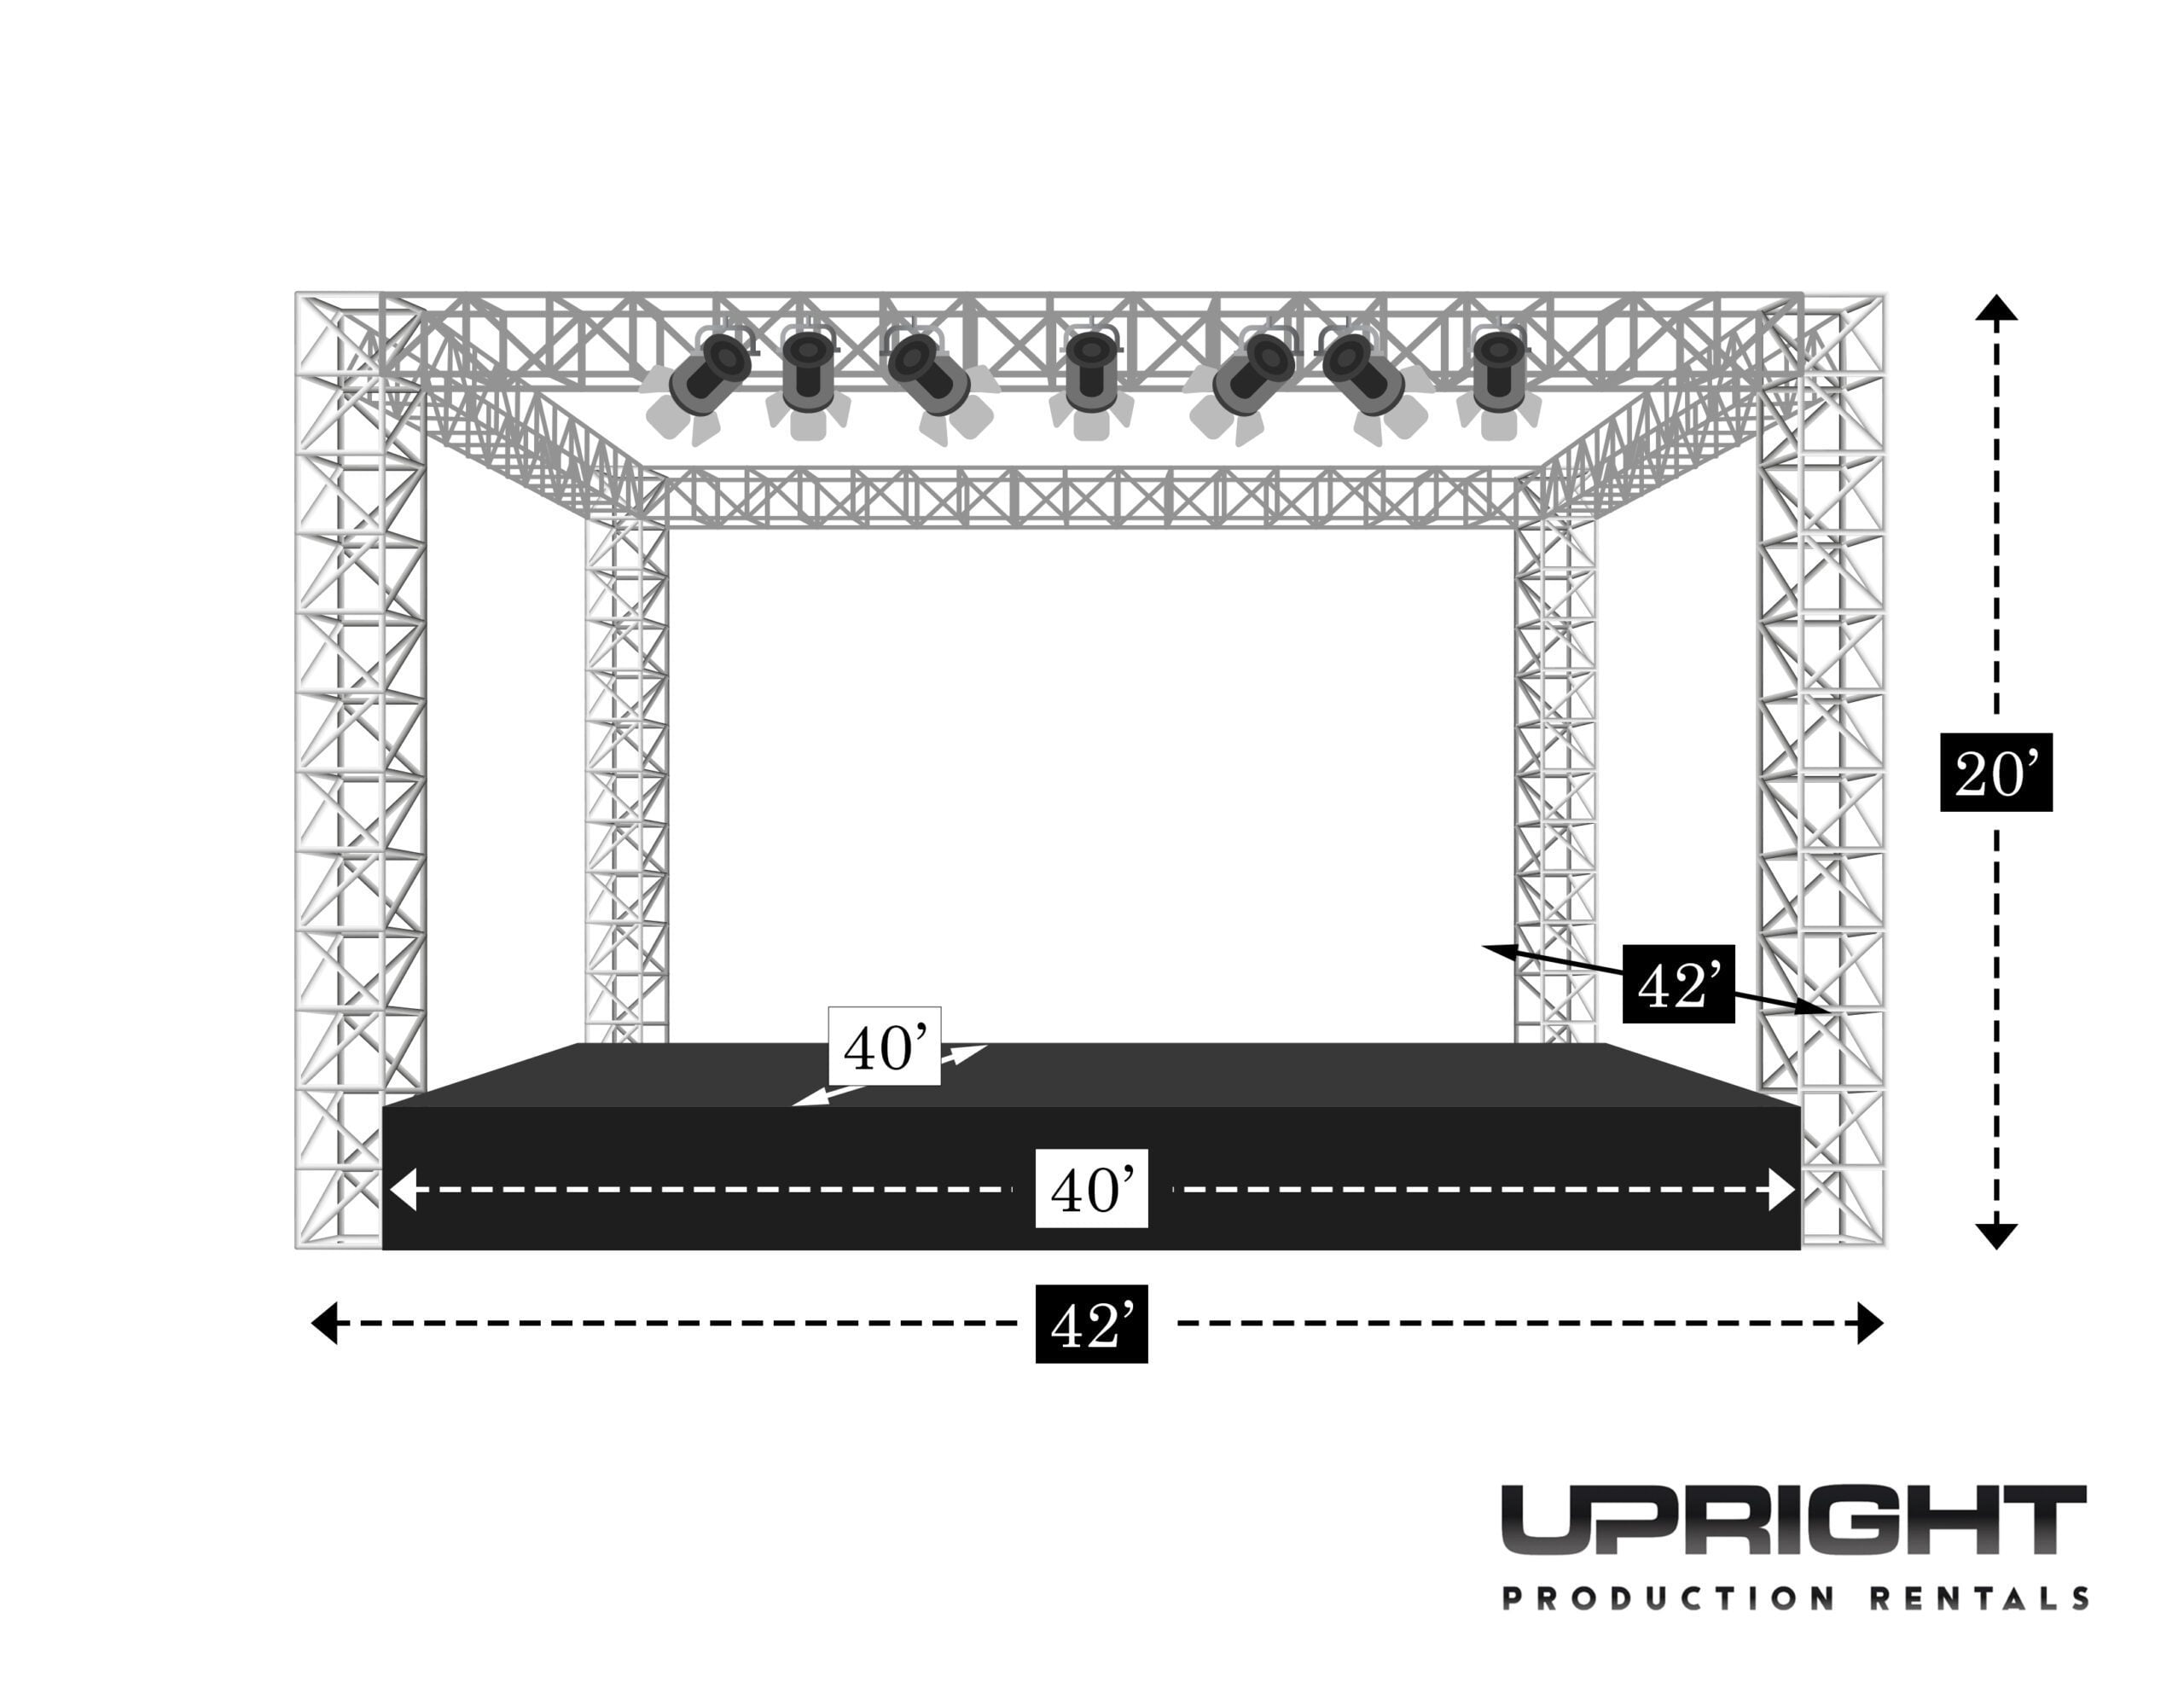 42*42*20 Truss structure stage